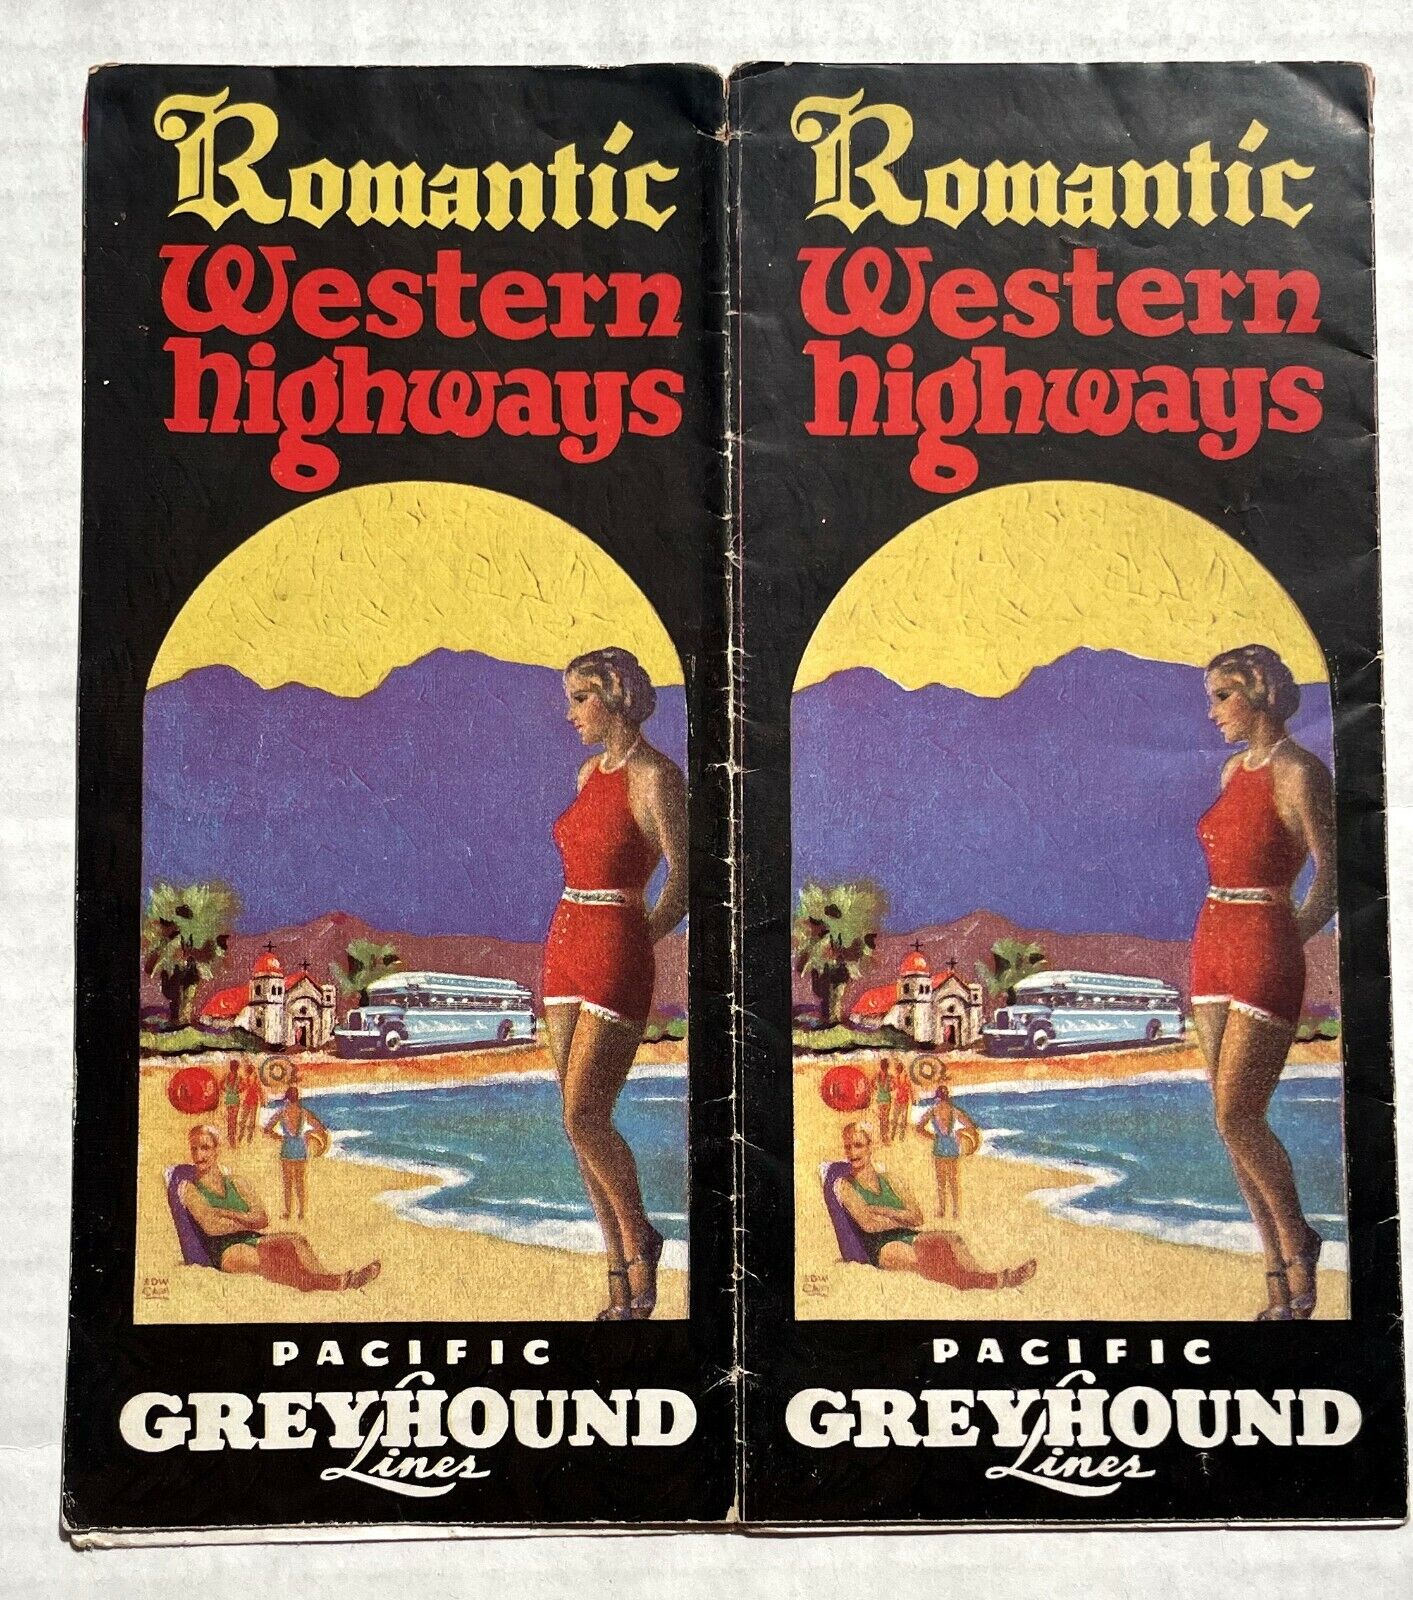 1930's Romantic Western Highways by Pacific Greyhound Lines Travel Brochure